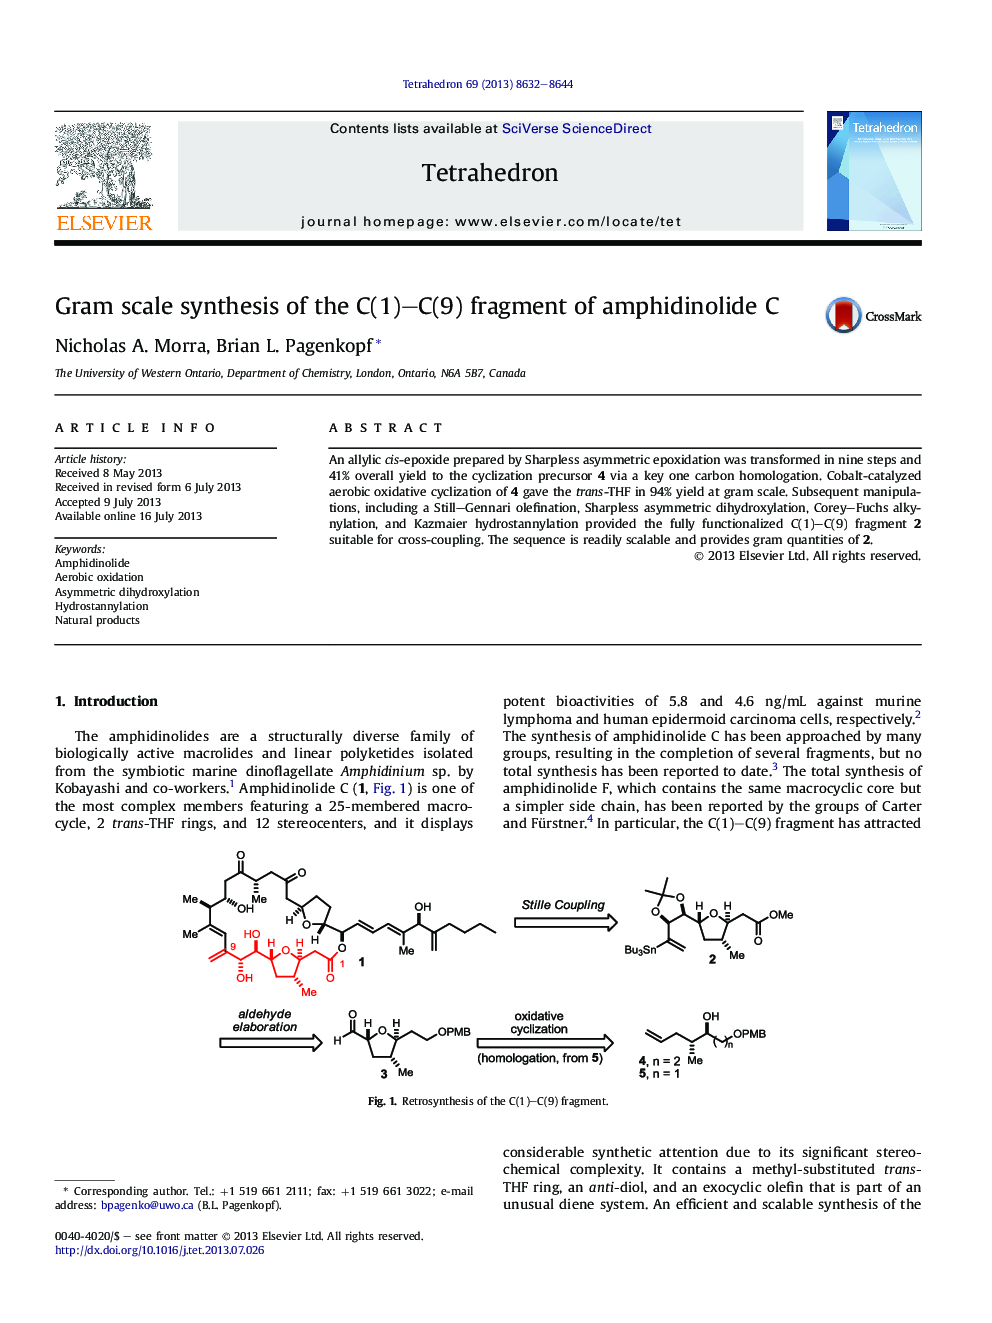 Gram scale synthesis of the C(1)-C(9) fragment of amphidinolide C